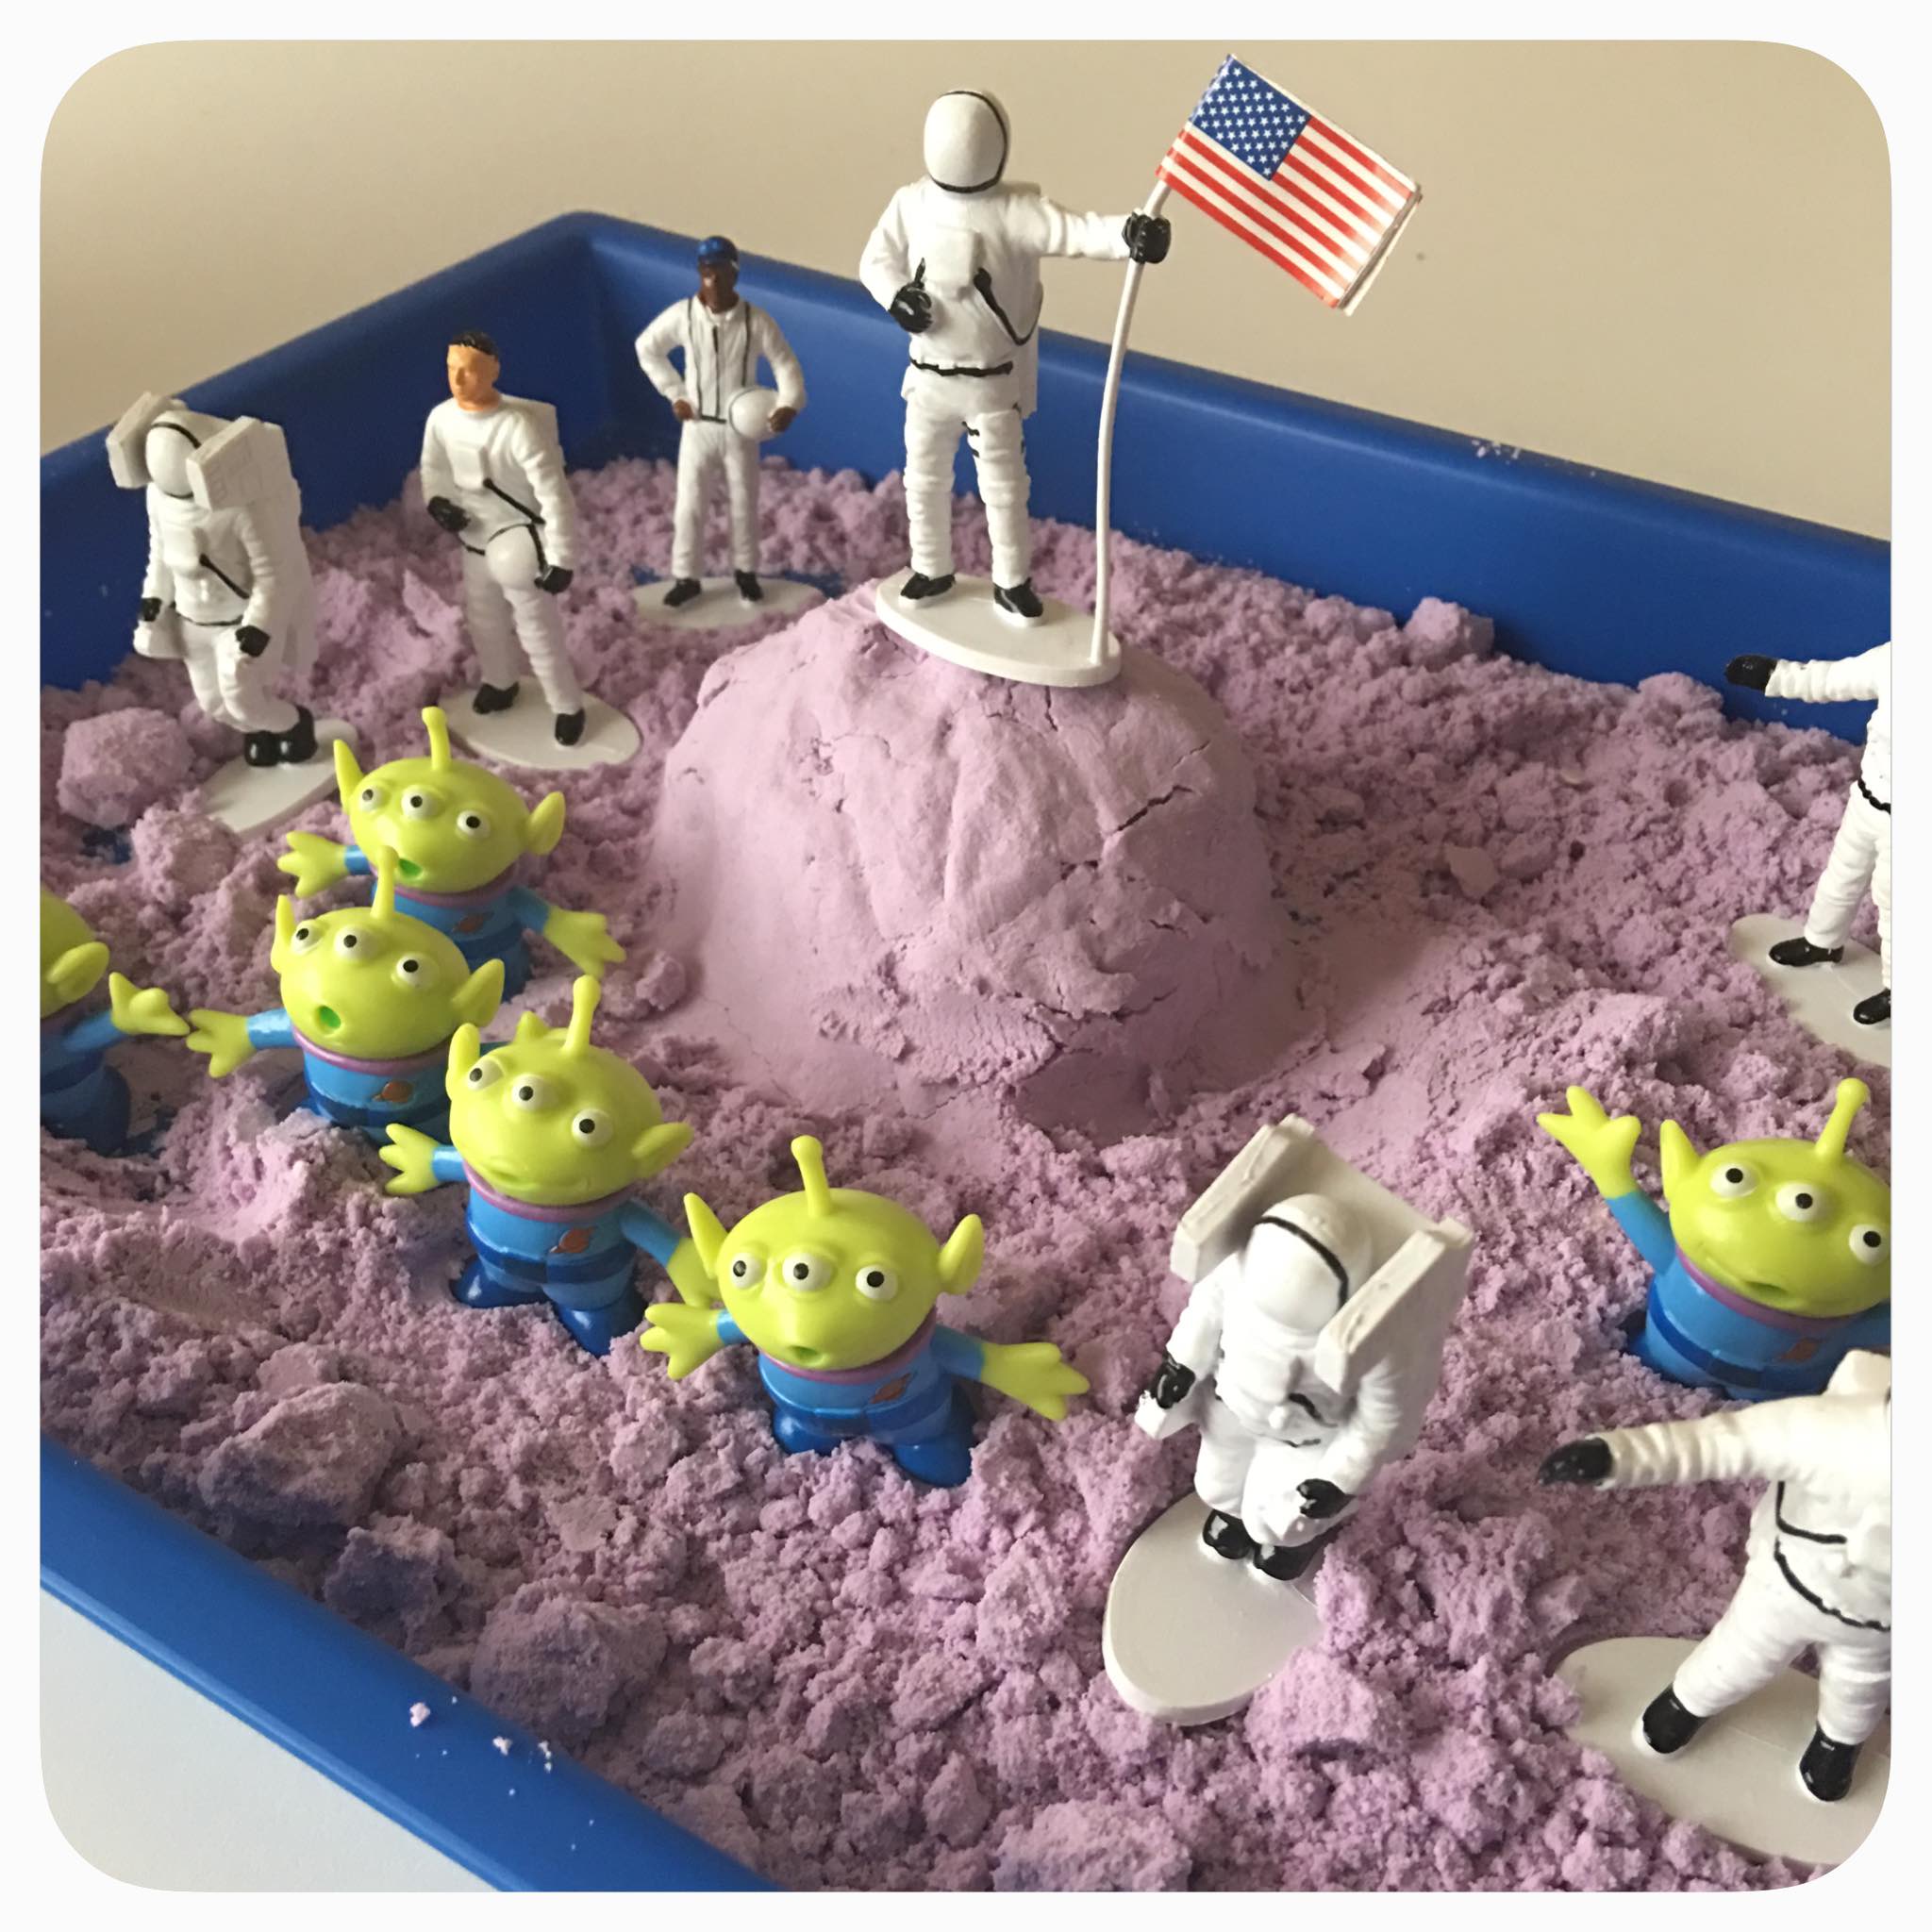 Creating simple sensory bins for exploring Outer Space. The lavender essential oils helps to create a sense of peace.